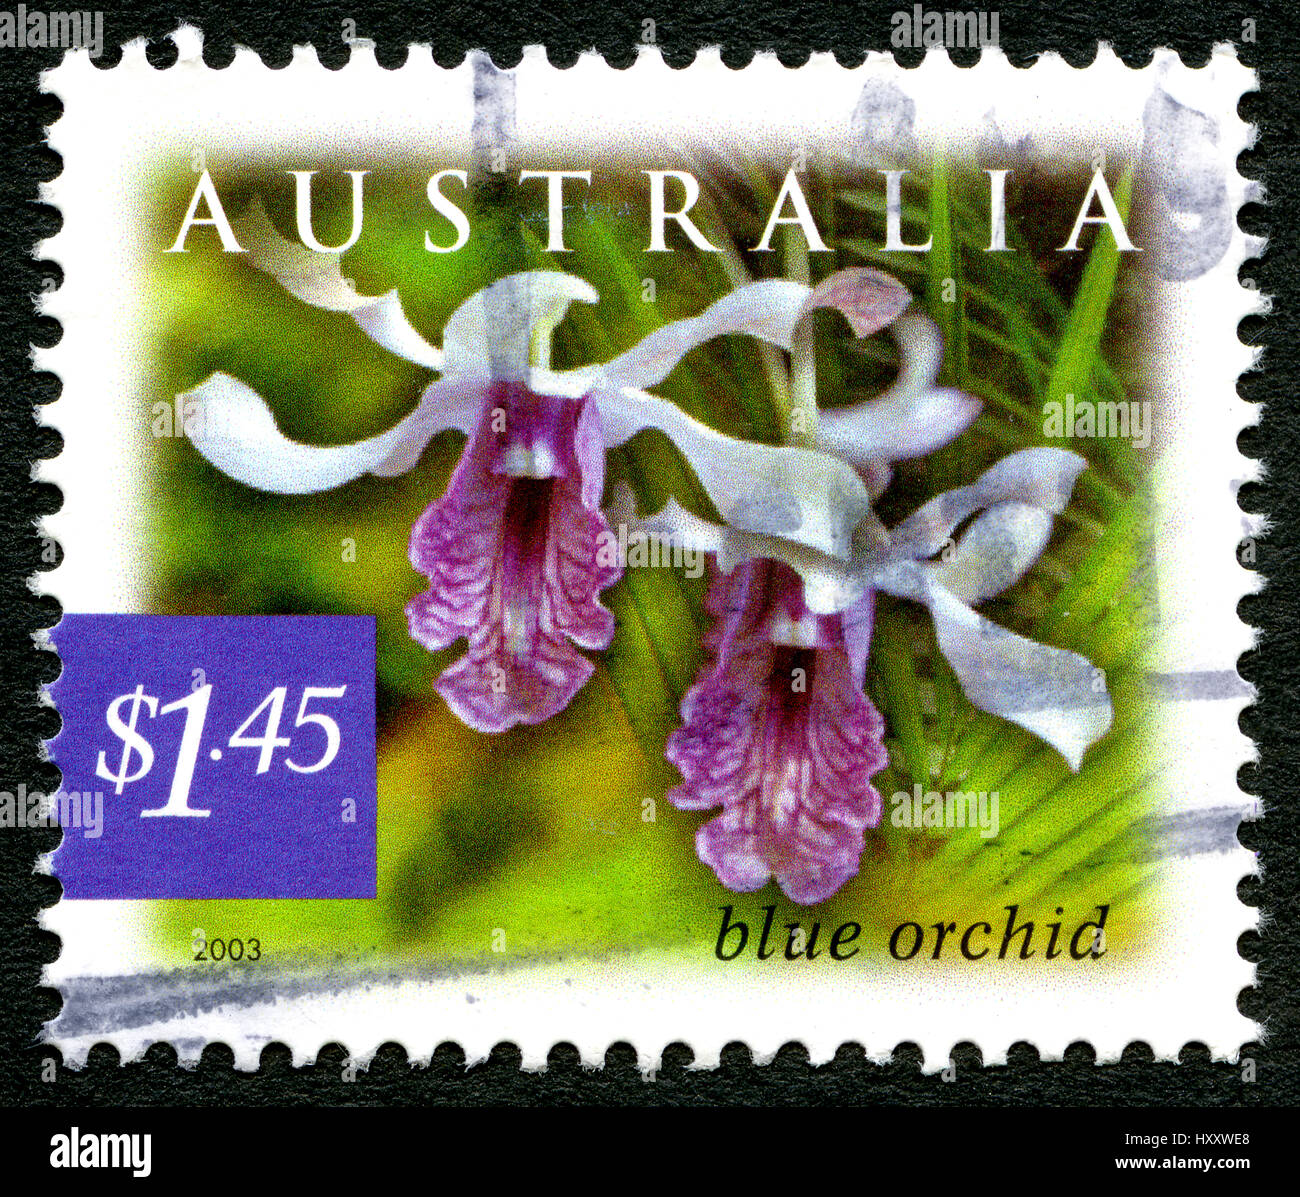 AUSTRALIA - CIRCA 2003: A used postage stamp from Australia, depicting an image of a Blue Orchid, circa 2003. Stock Photo